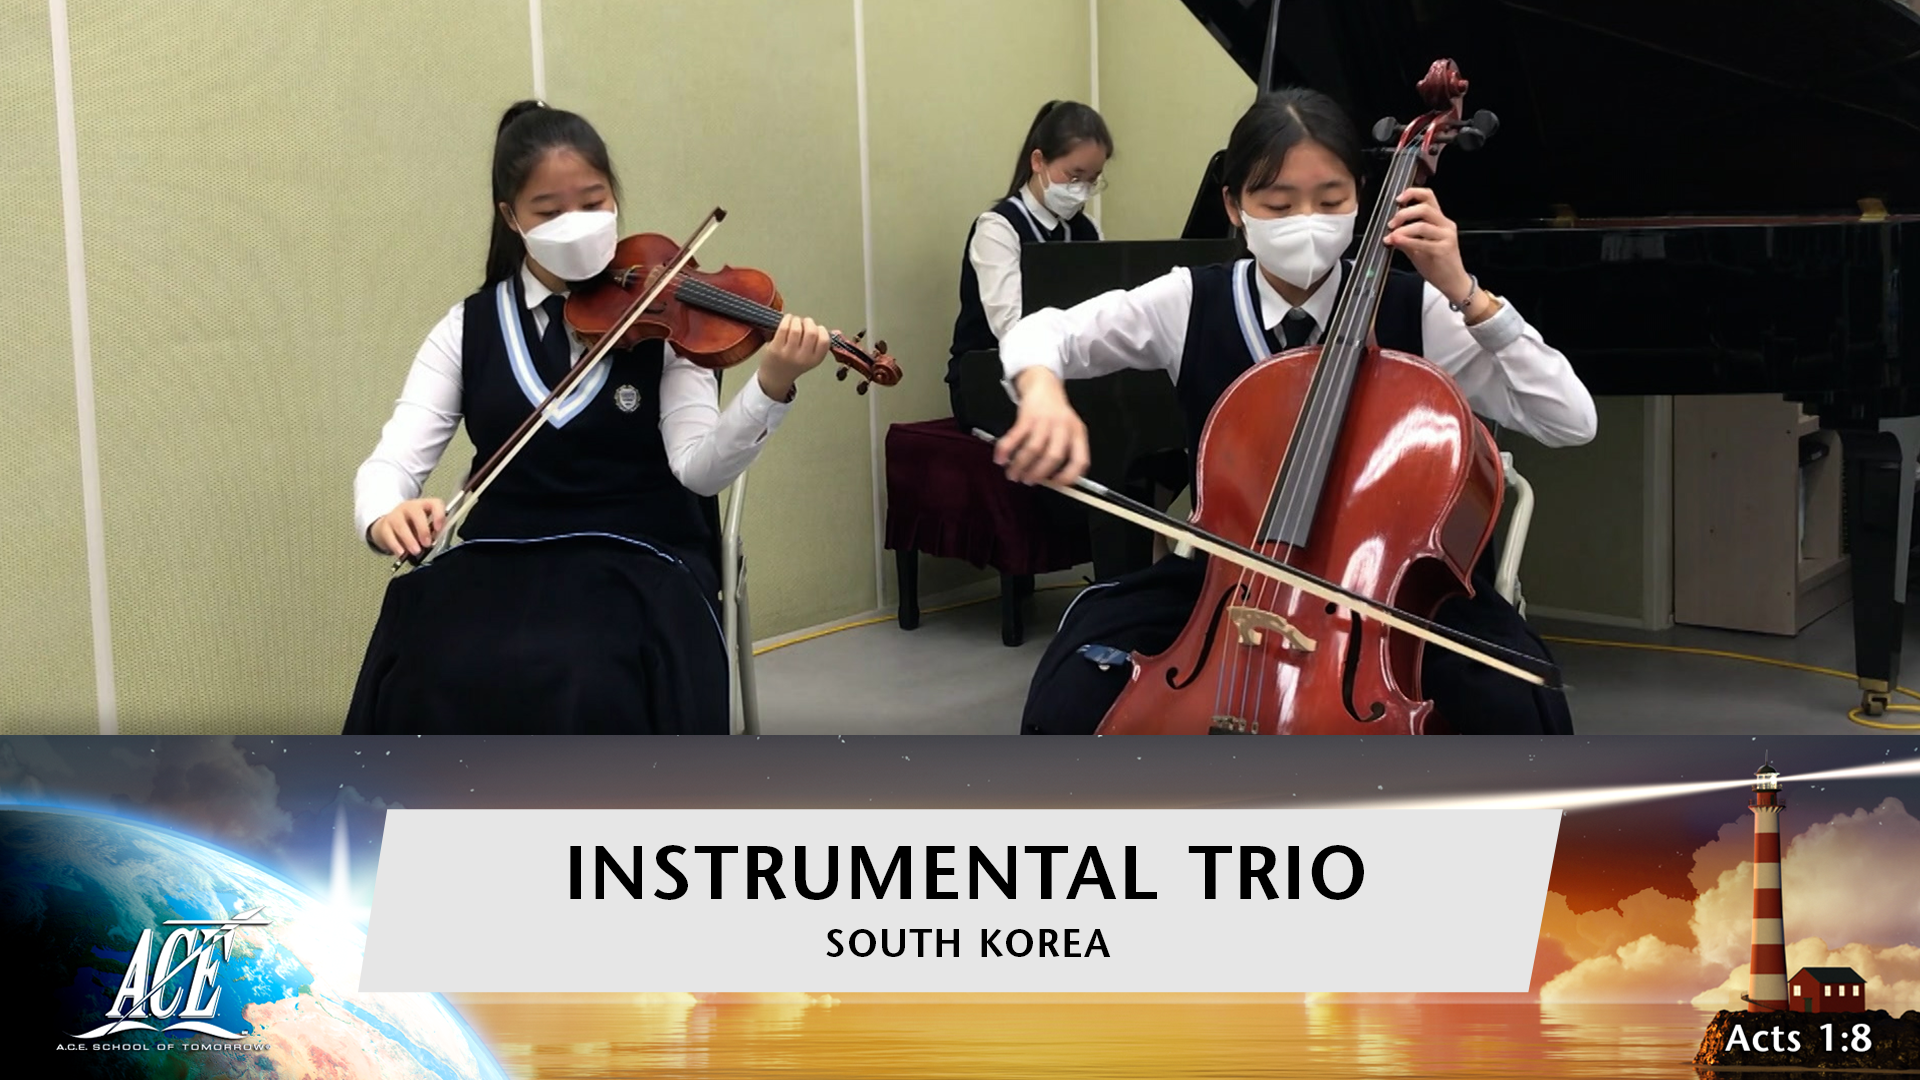 Instrumental Trio, "Blessings" - ISC 2022